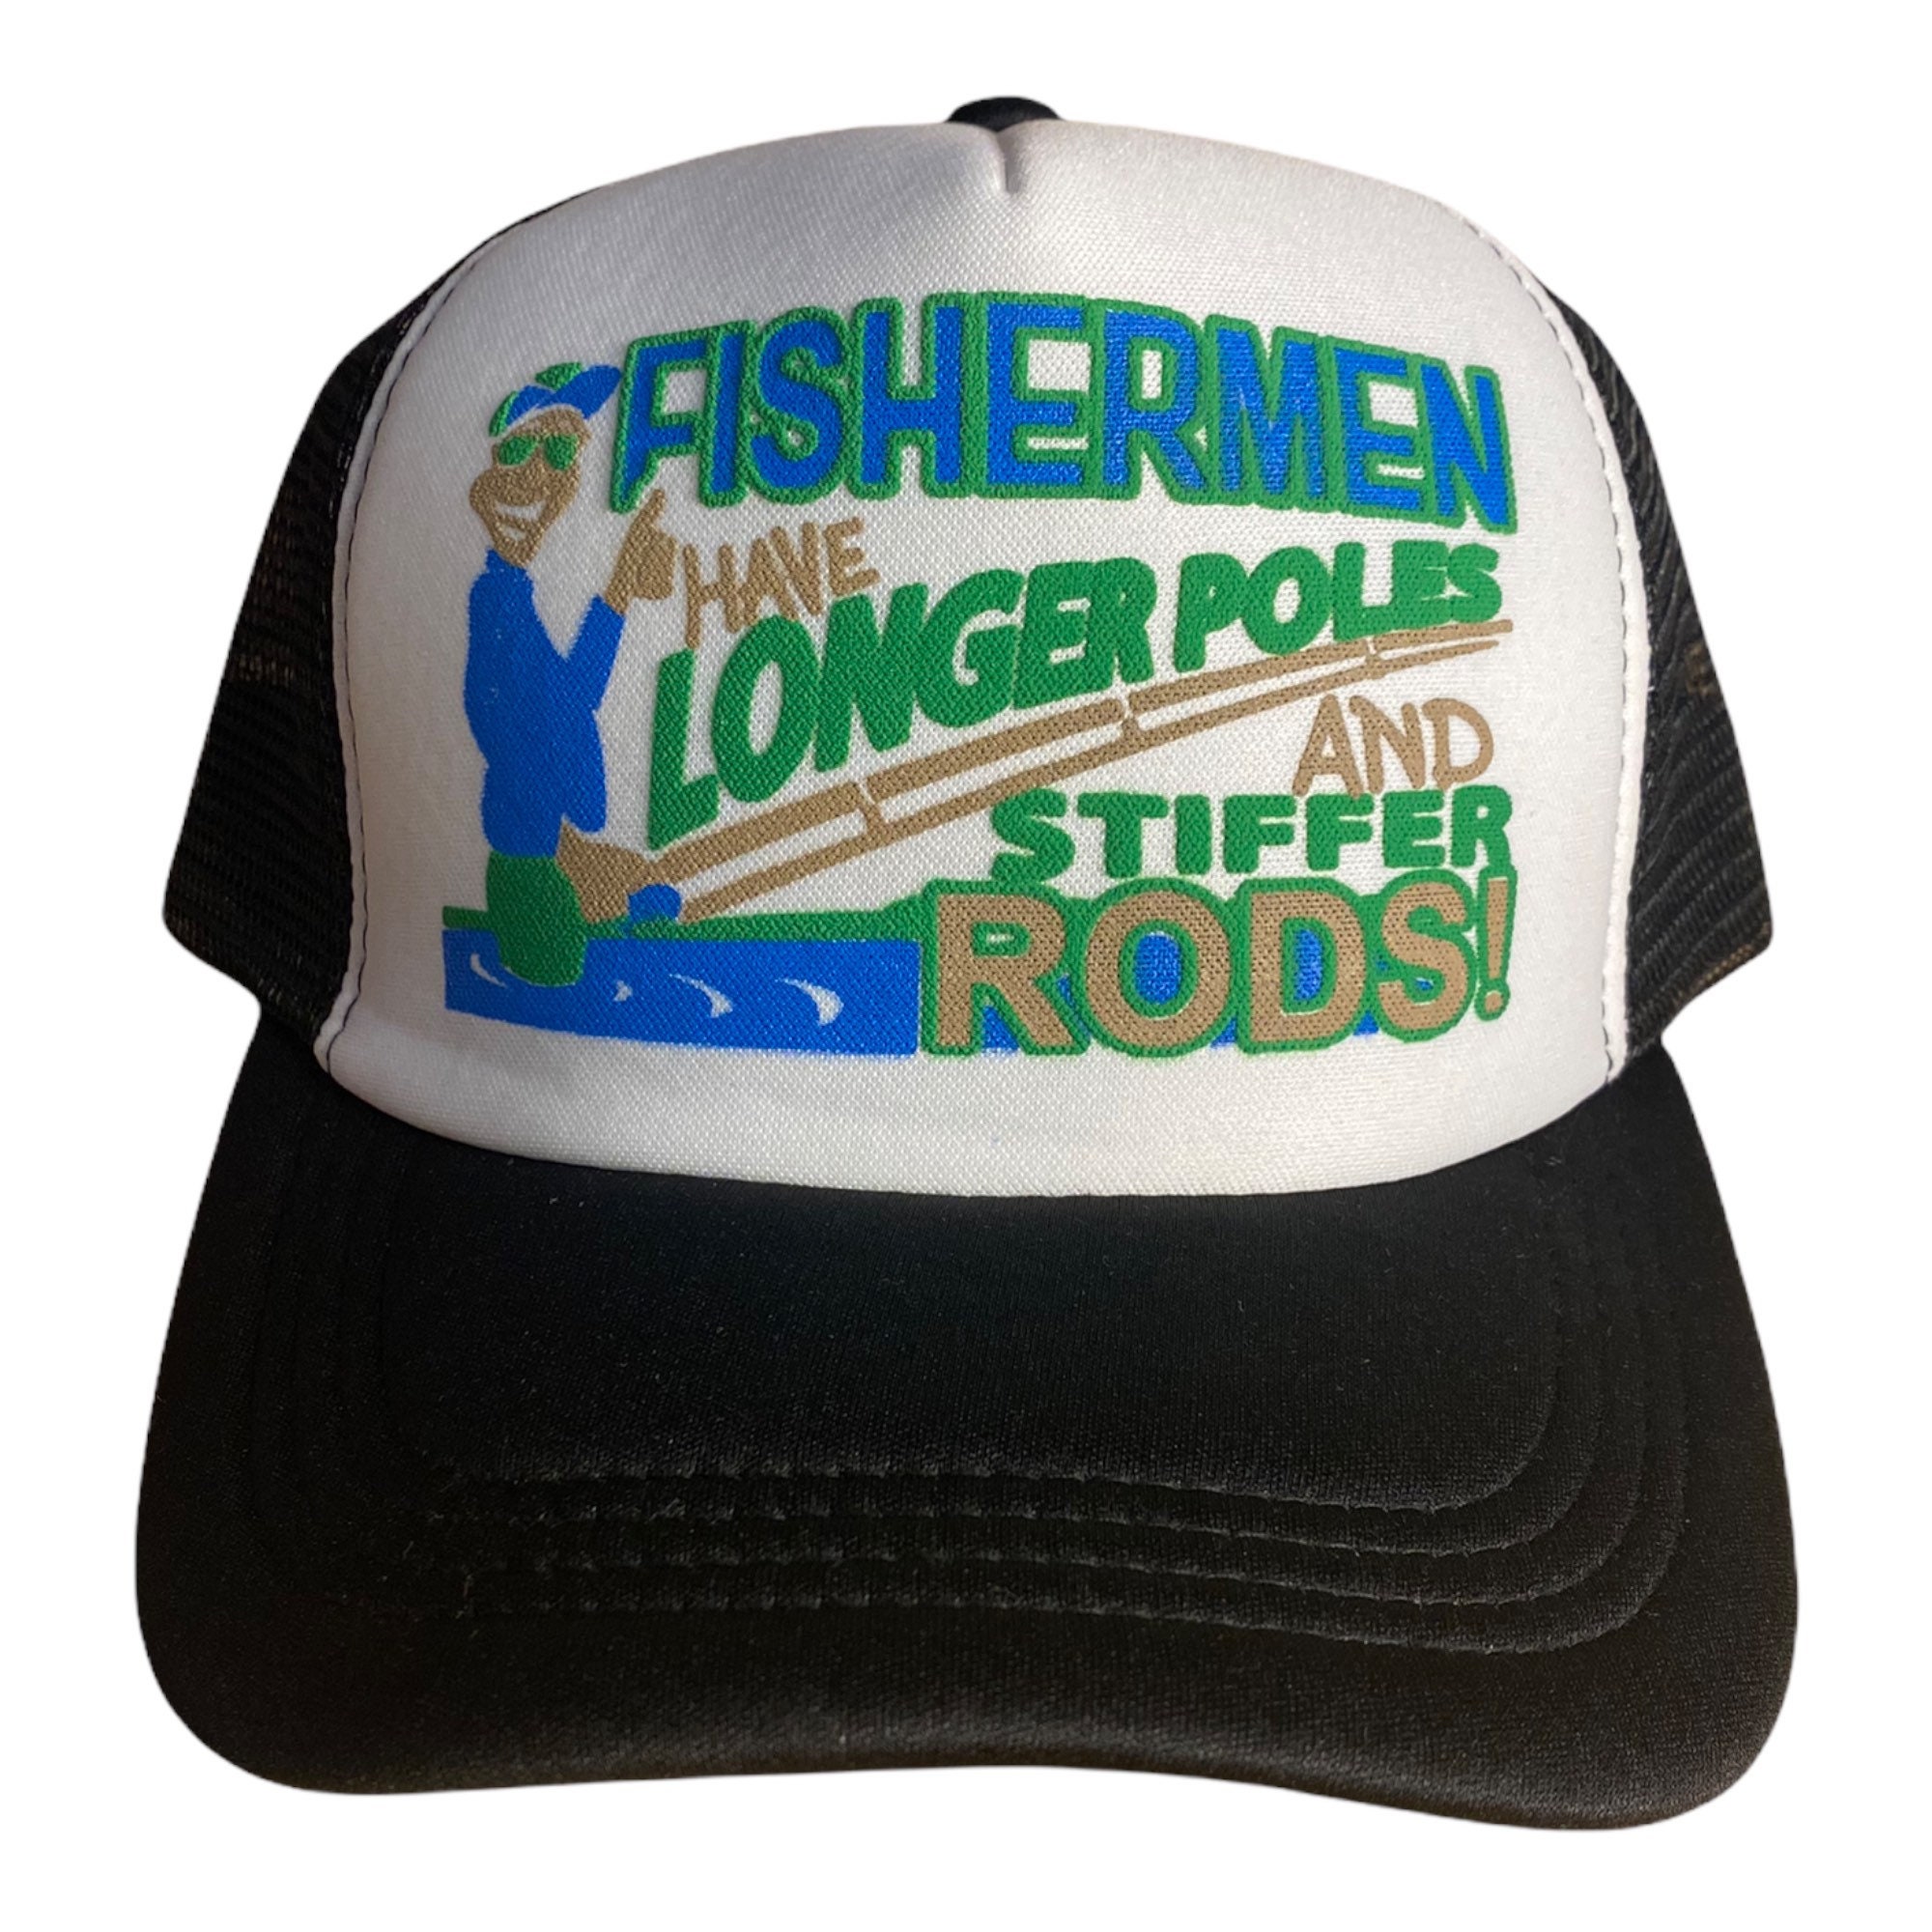 Vintage Fishing Hat // Funny Trucker Hat // Wanted Women to Cook